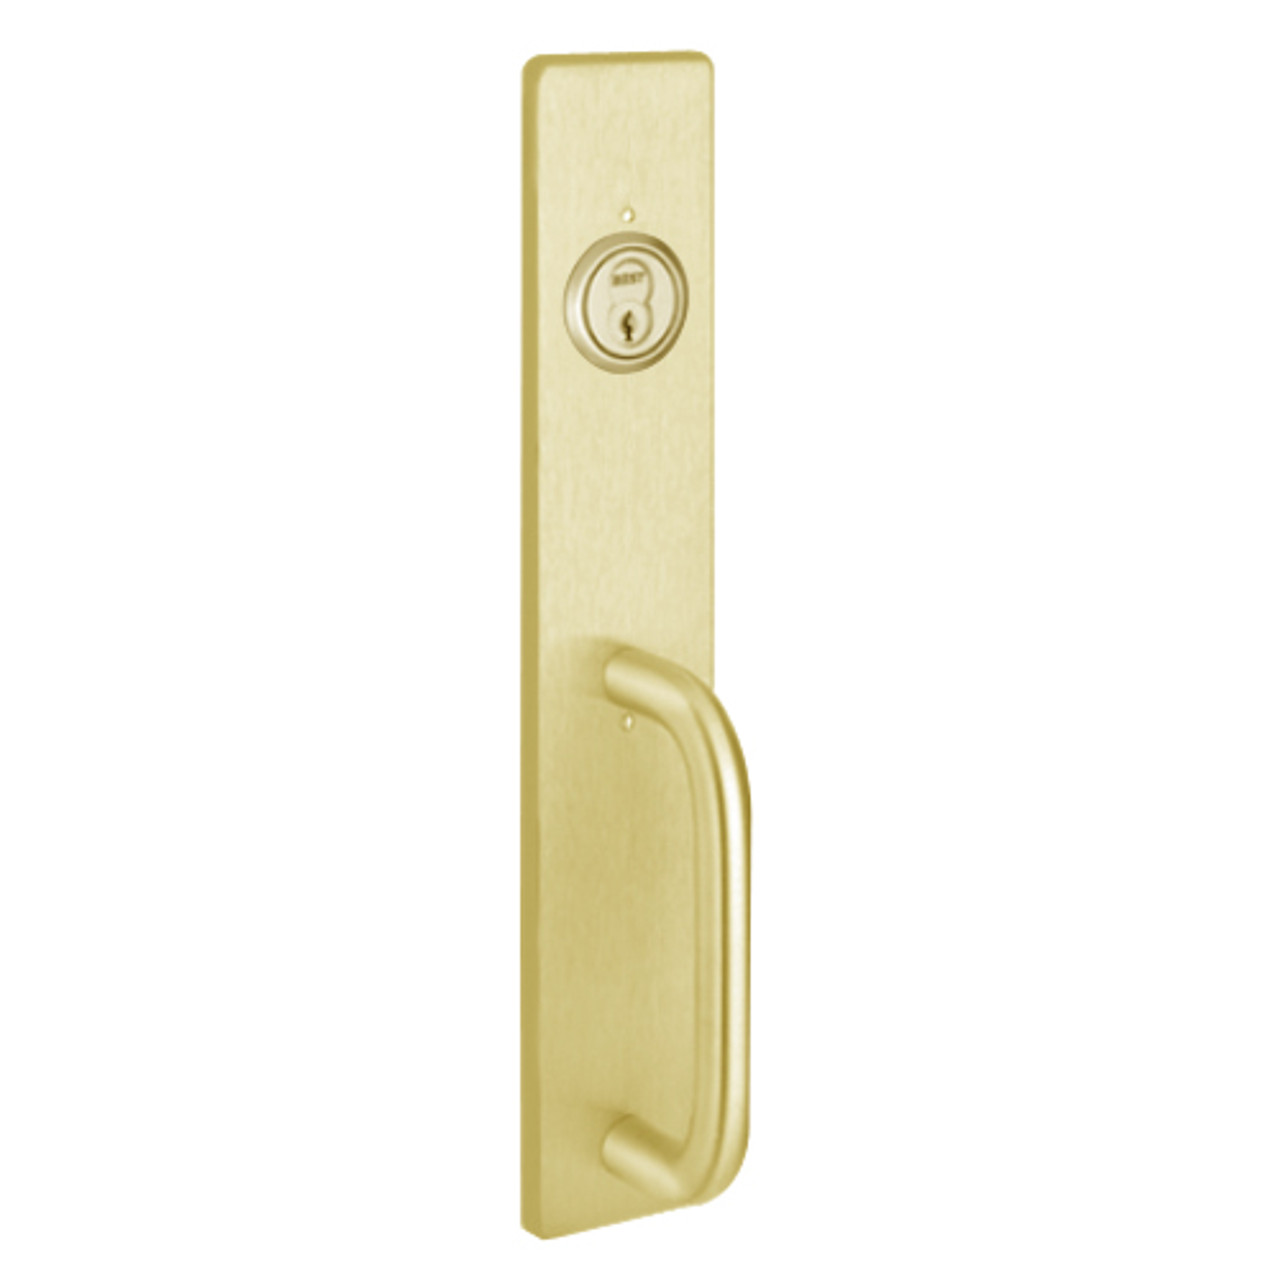 R1703C-605 PHI Key Retracts Latchbolt Retrofit Trim with C Design Pull for Apex and Olympian Series Exit Device in Bright Brass Finish